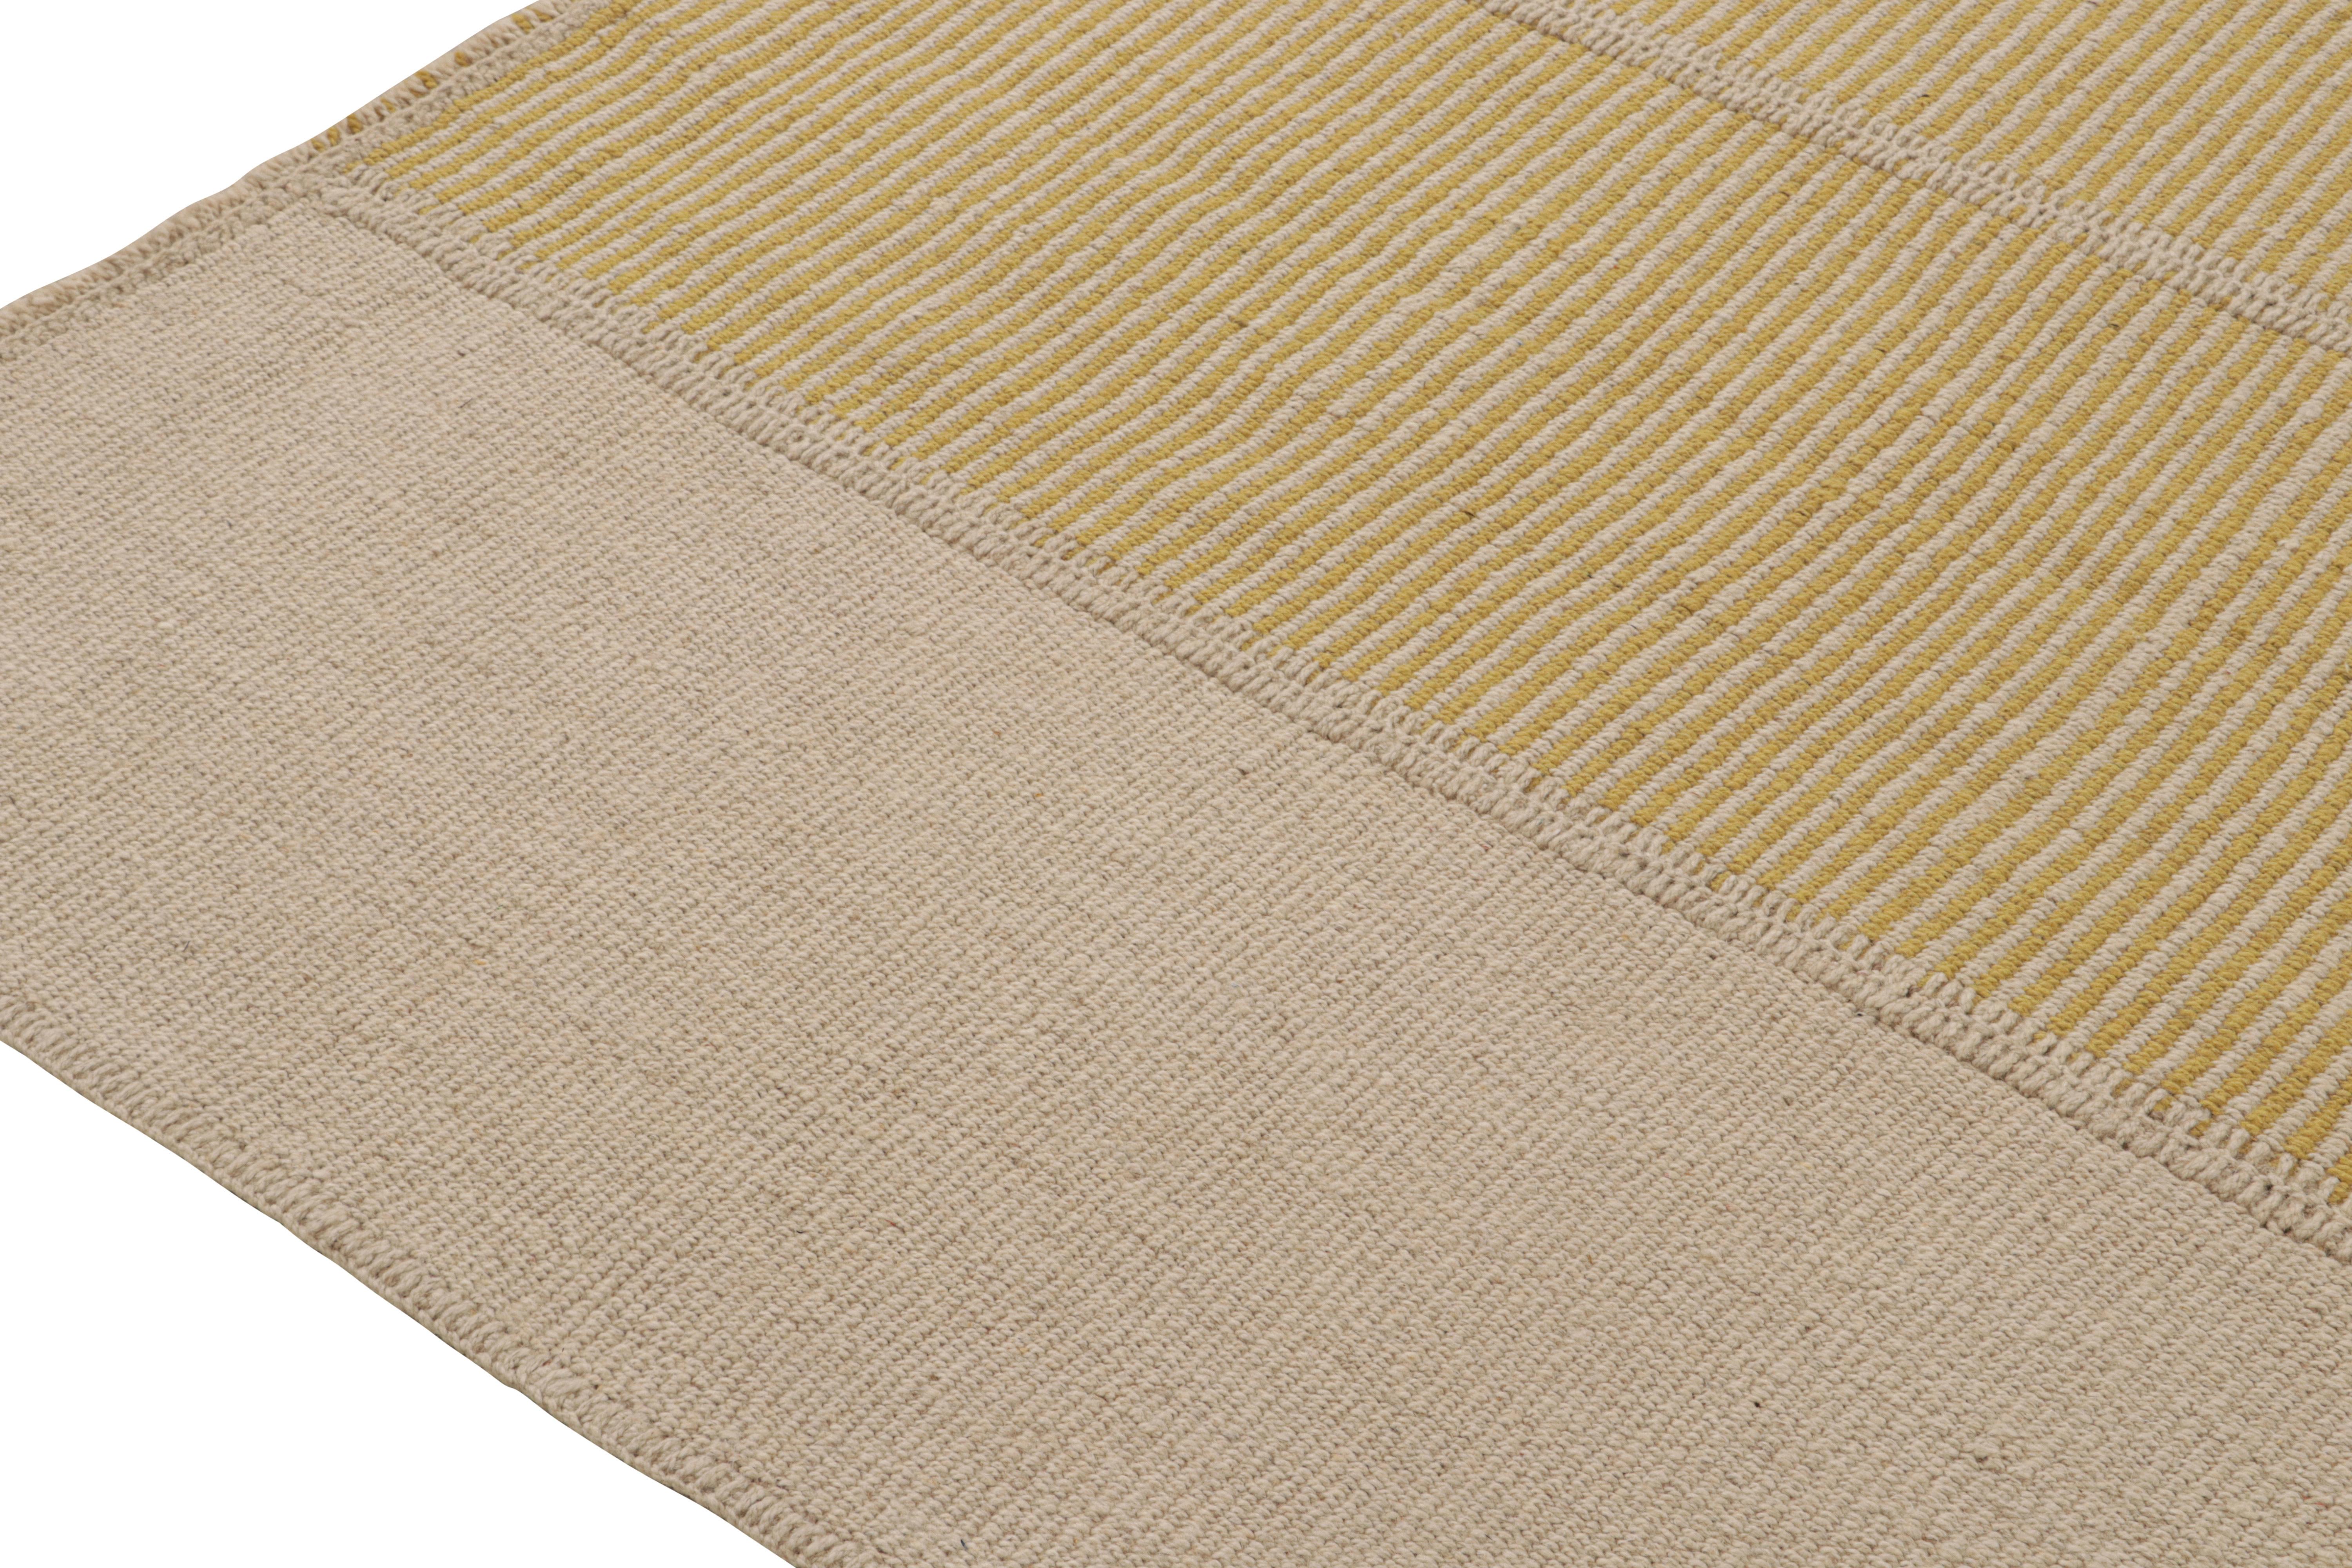 Modern Rug & Kilim’s Contemporary Kilim in Beige and Gold Stripes For Sale